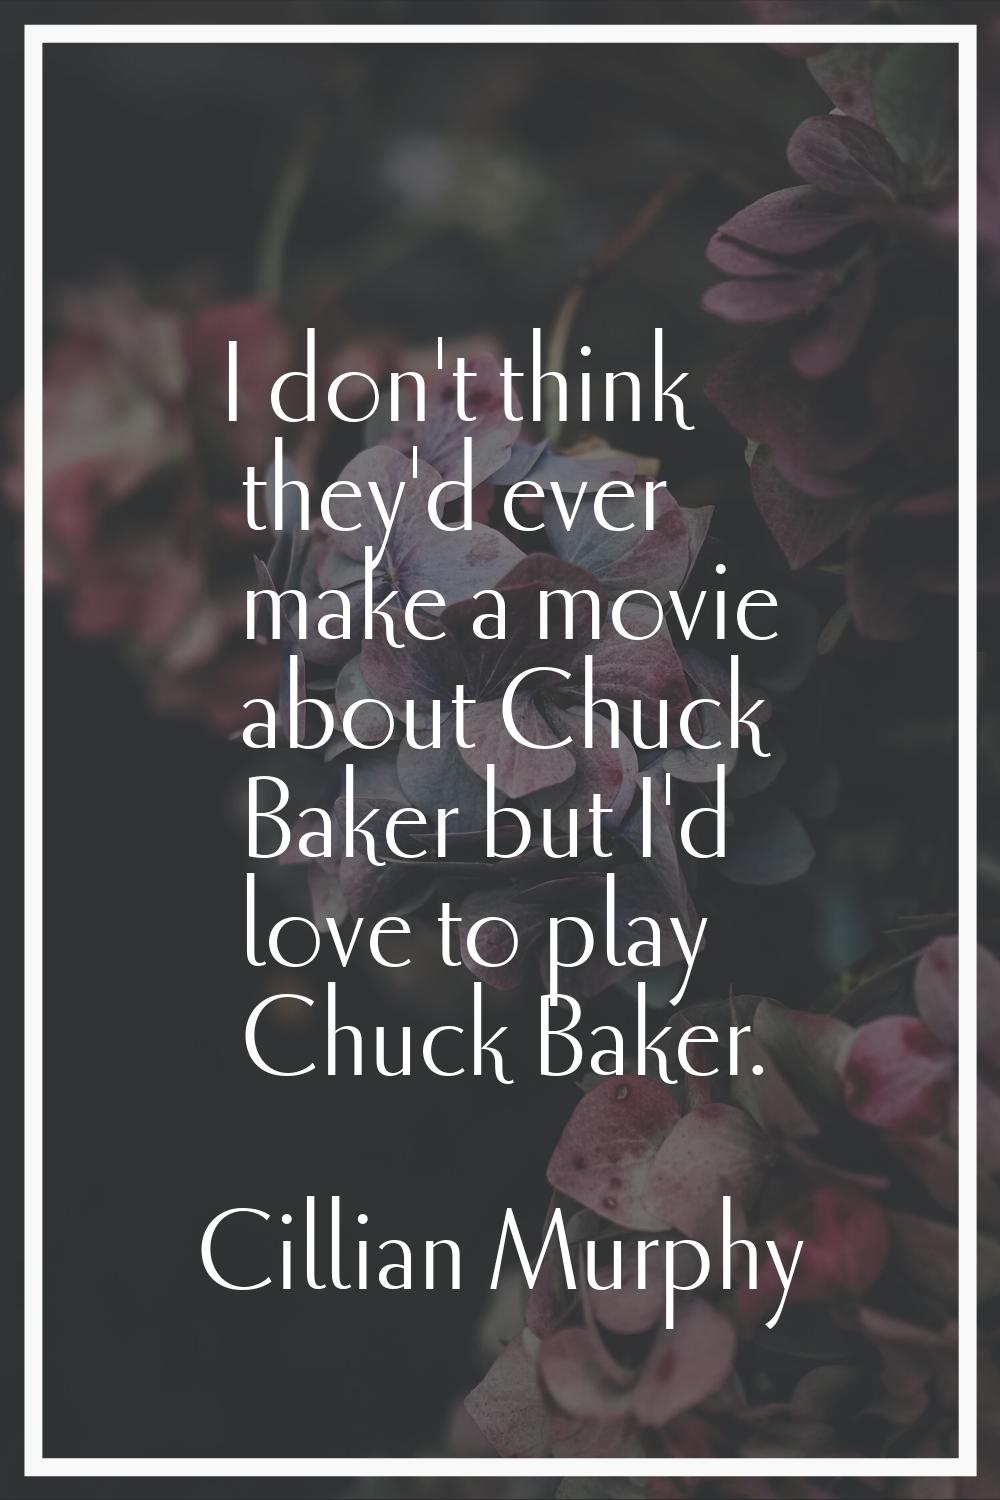 I don't think they'd ever make a movie about Chuck Baker but I'd love to play Chuck Baker.